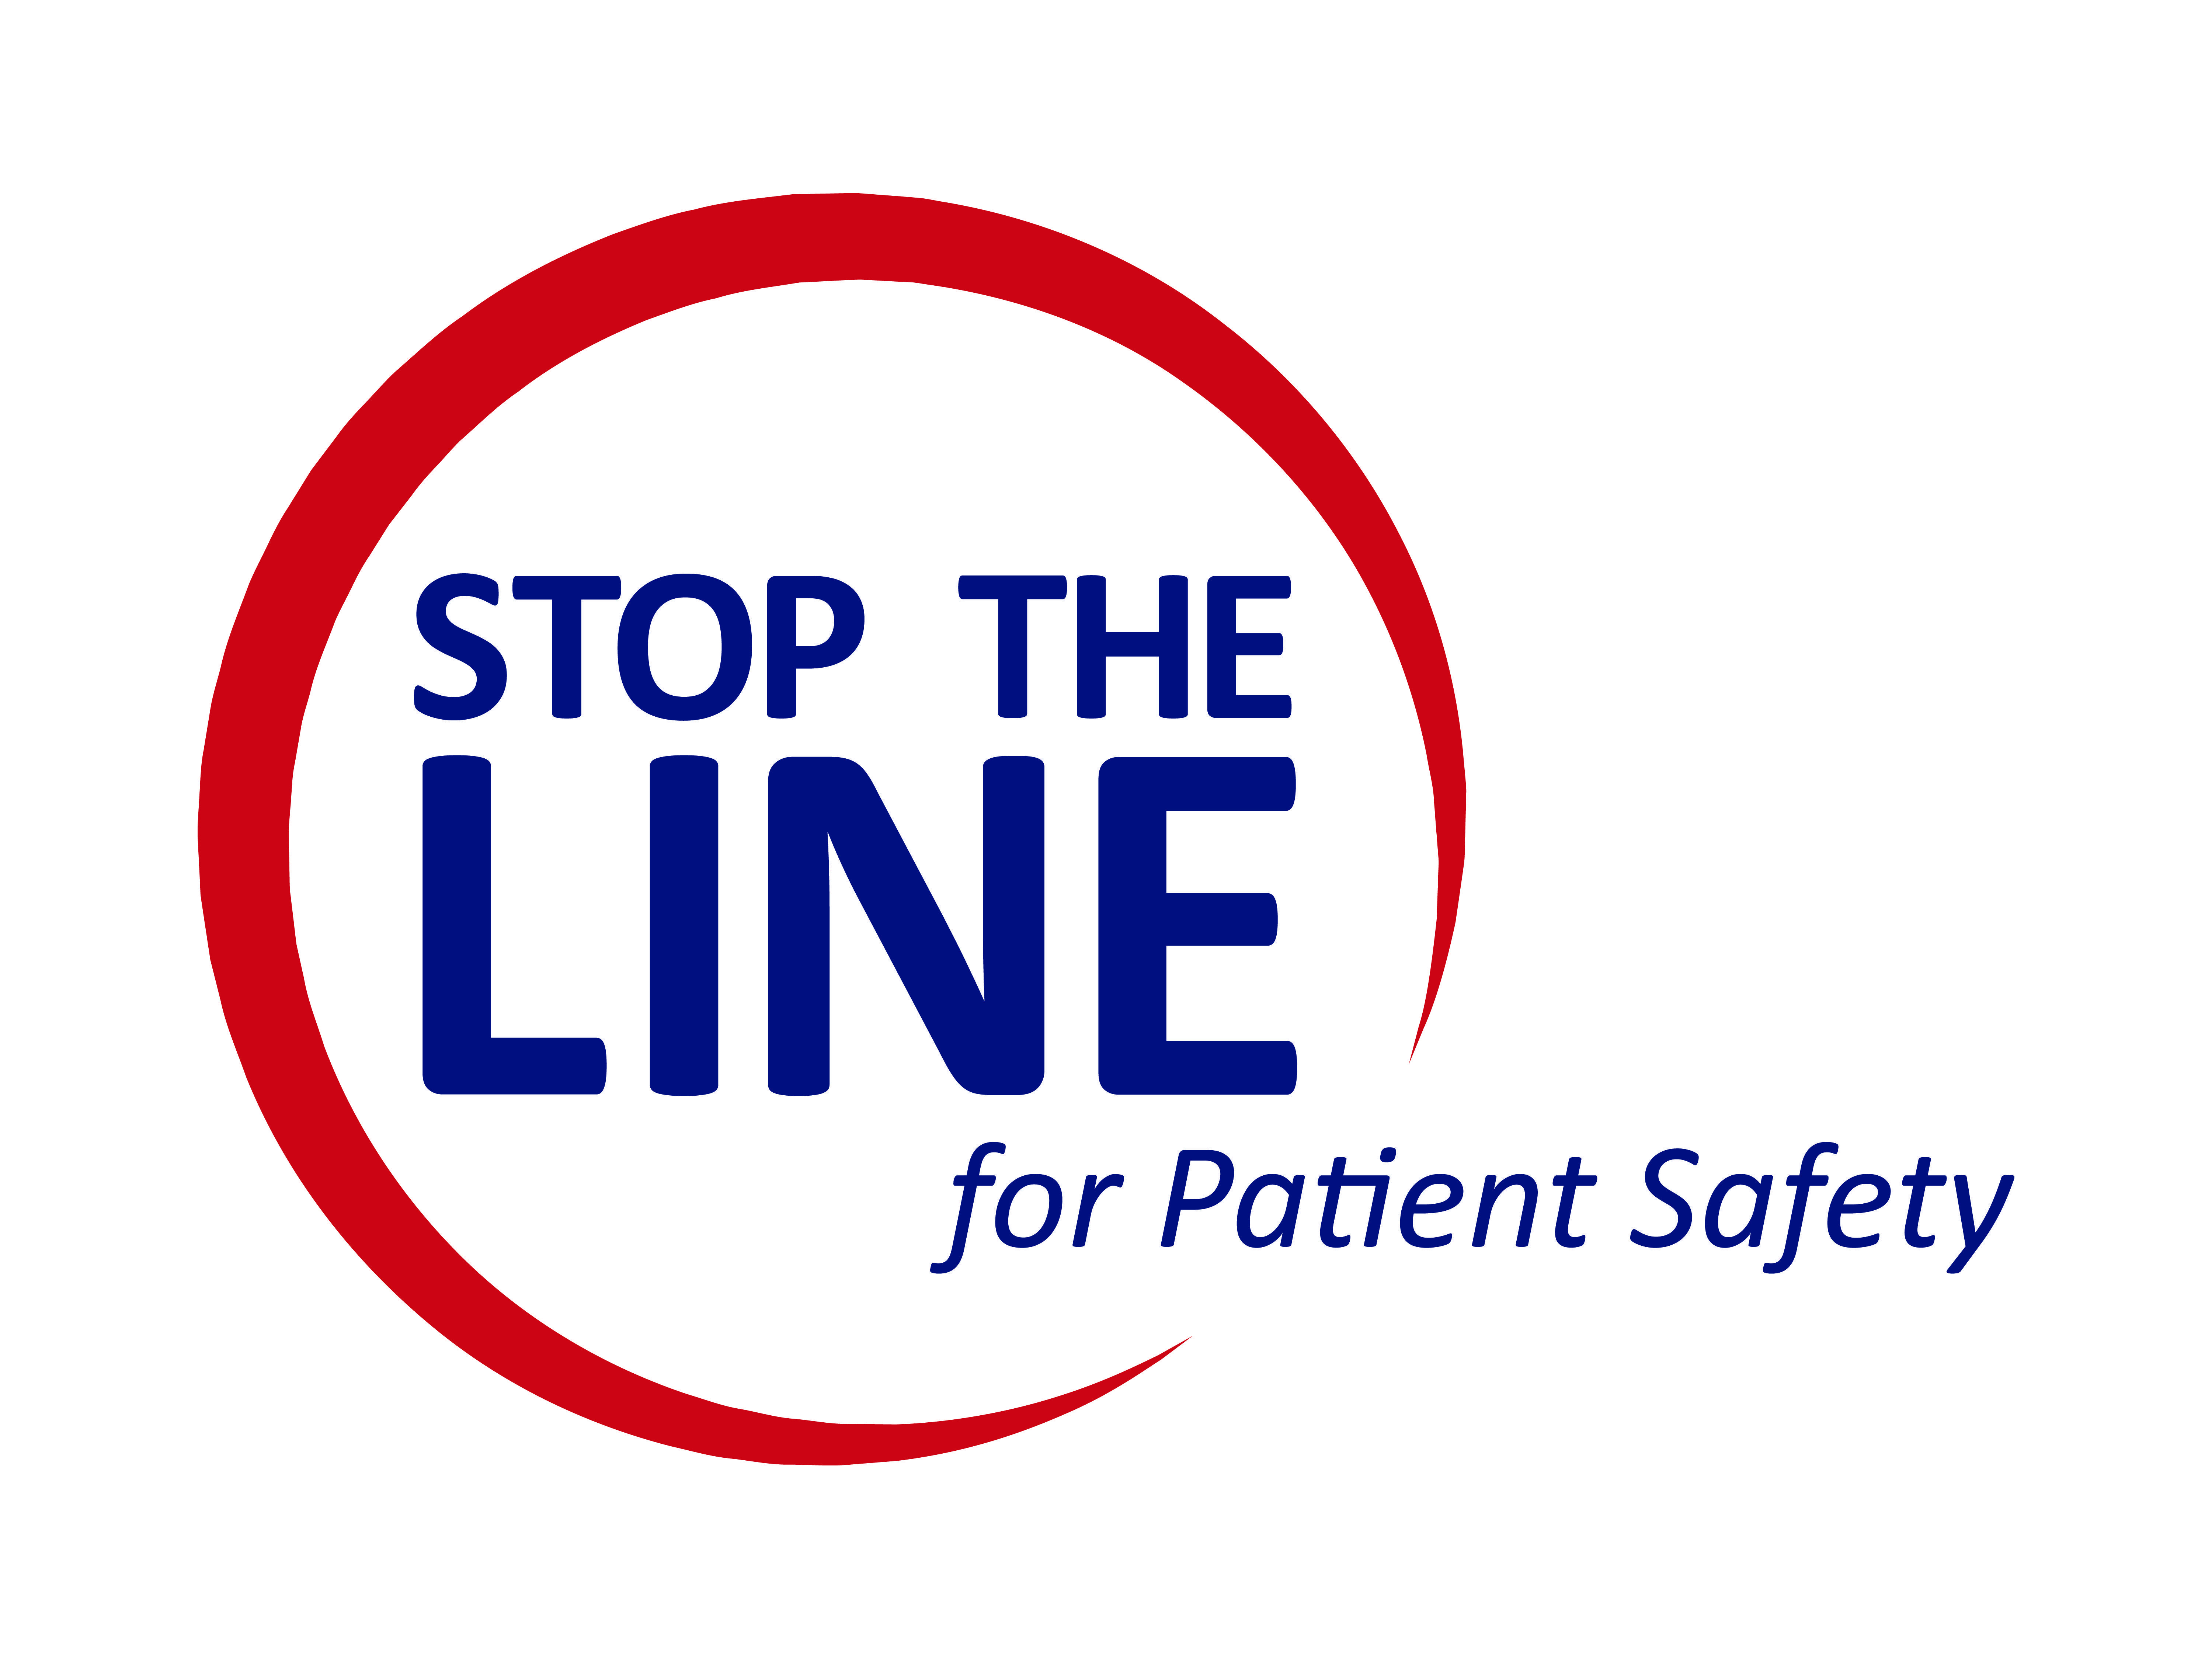 Patient Safety Logo - Stop the Line for Patient Safety Initiative - Quality, Safety & Value